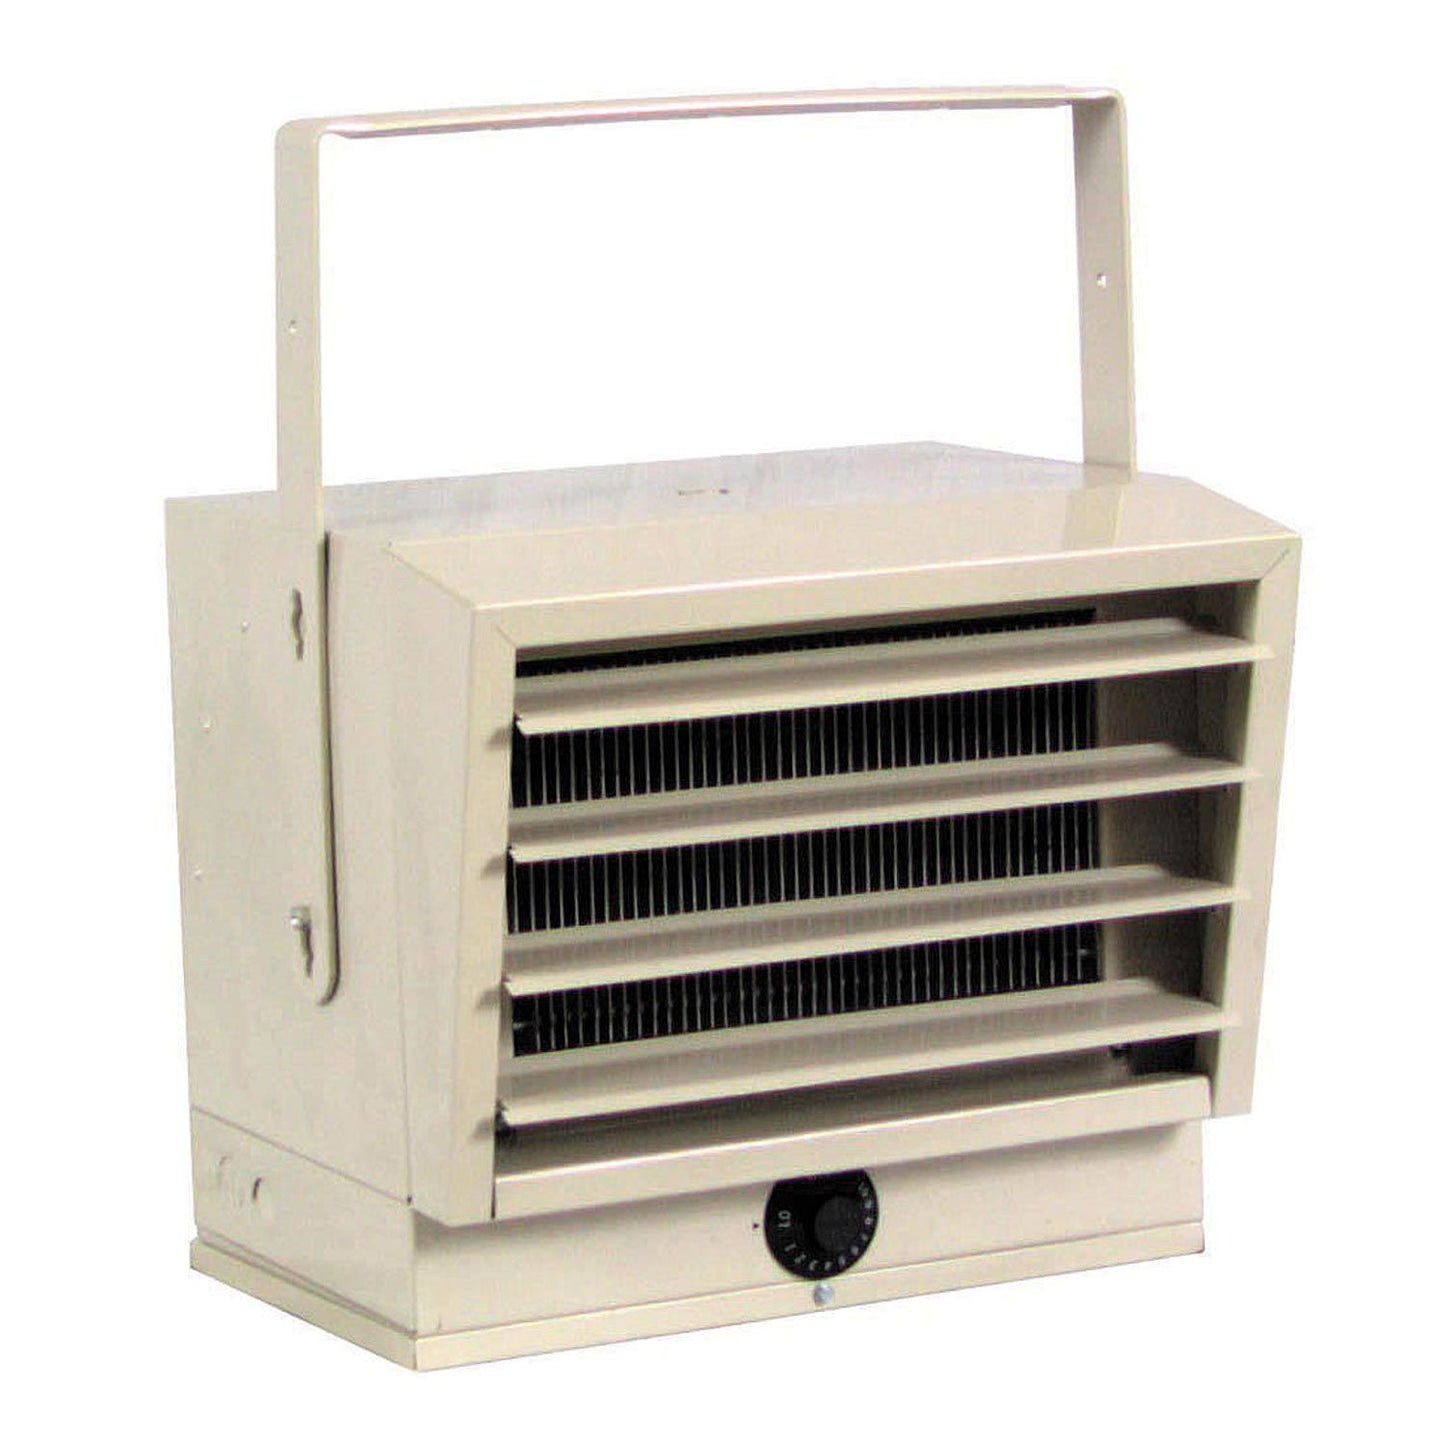 Electric Heater - 480 Volts - 17,100 BTU - 270 CFM - 1 or 3 Phase - Industrial